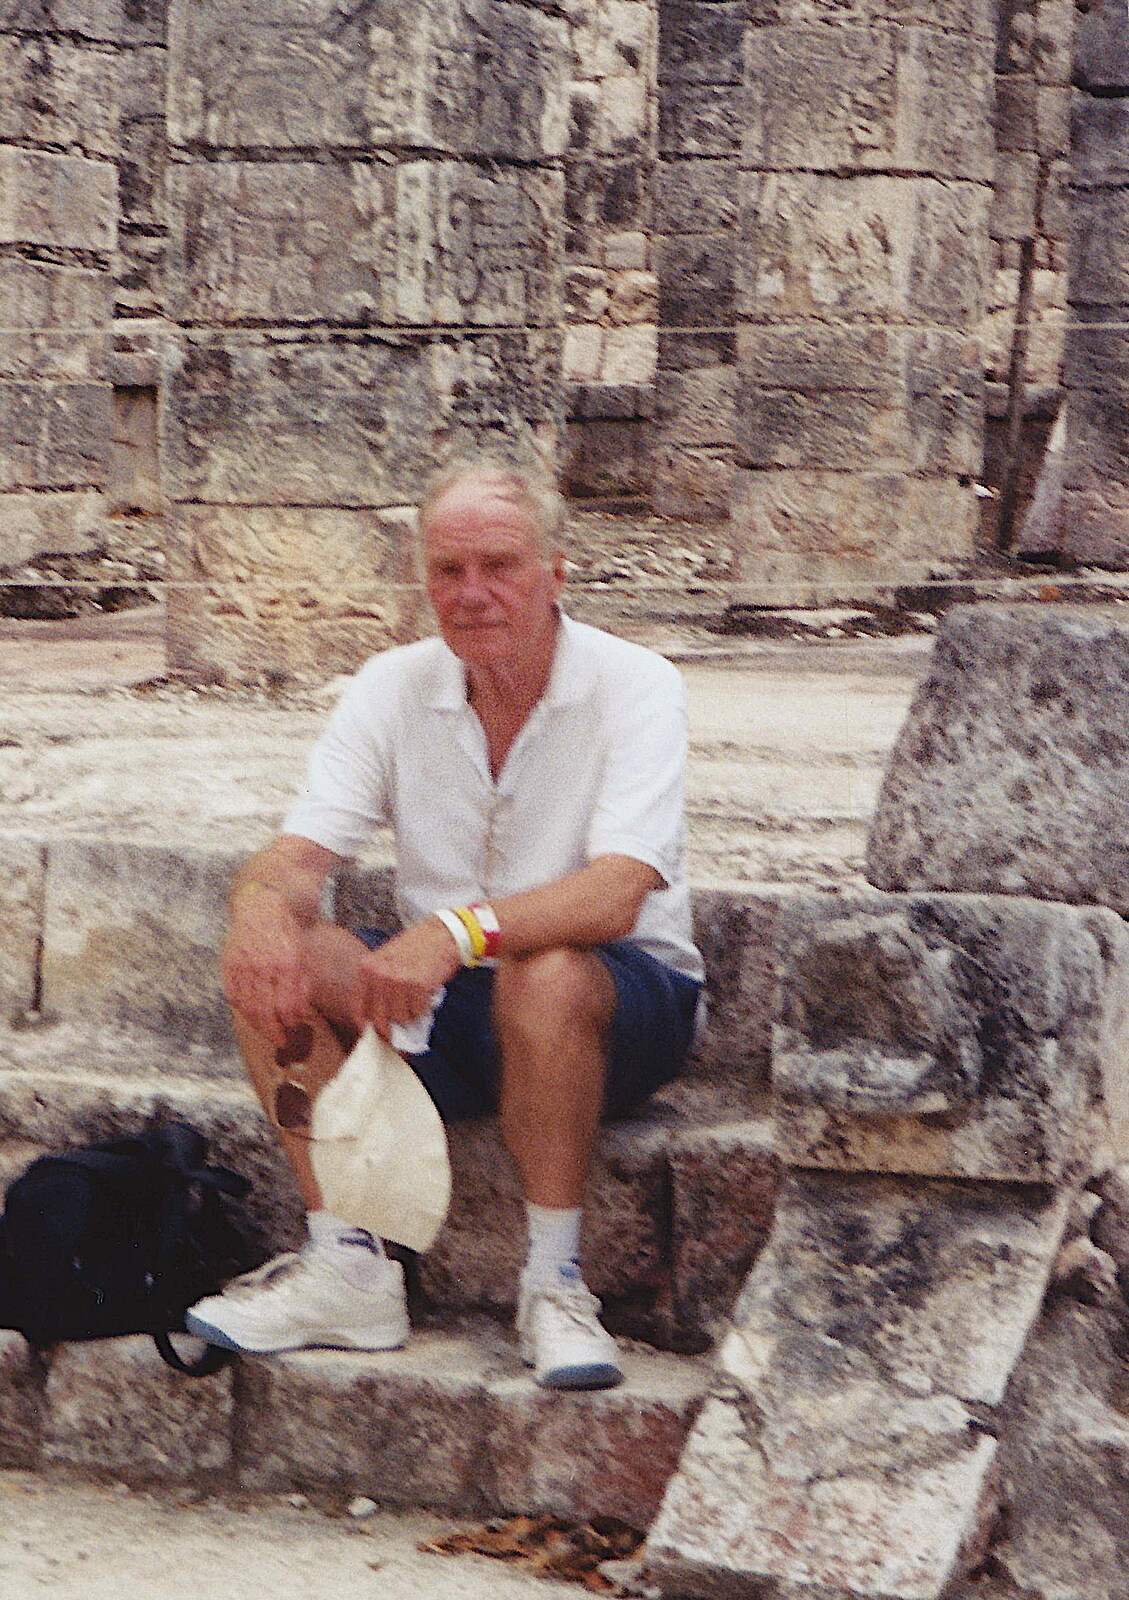 The Grandad Archive, Various Locations - 7th January 2023: On holiday in Mexico